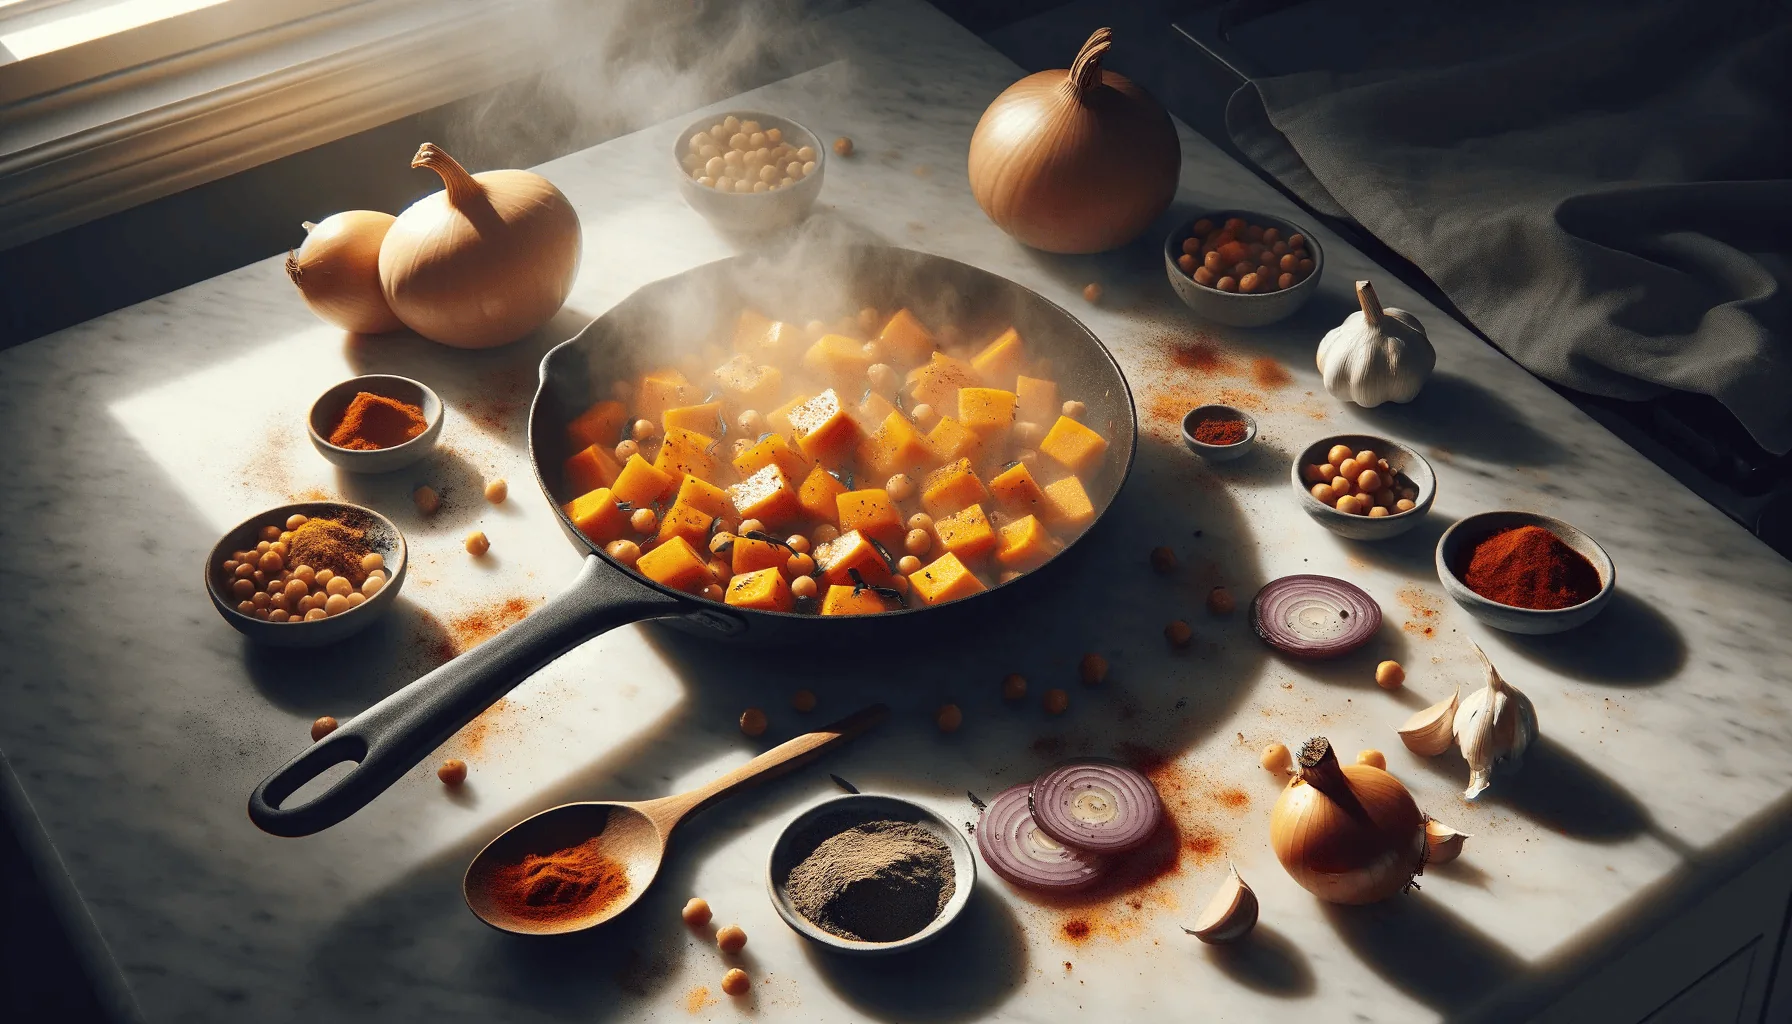 Skillet with steaming butternut squash and vegetables mid-cooking on a marble countertop